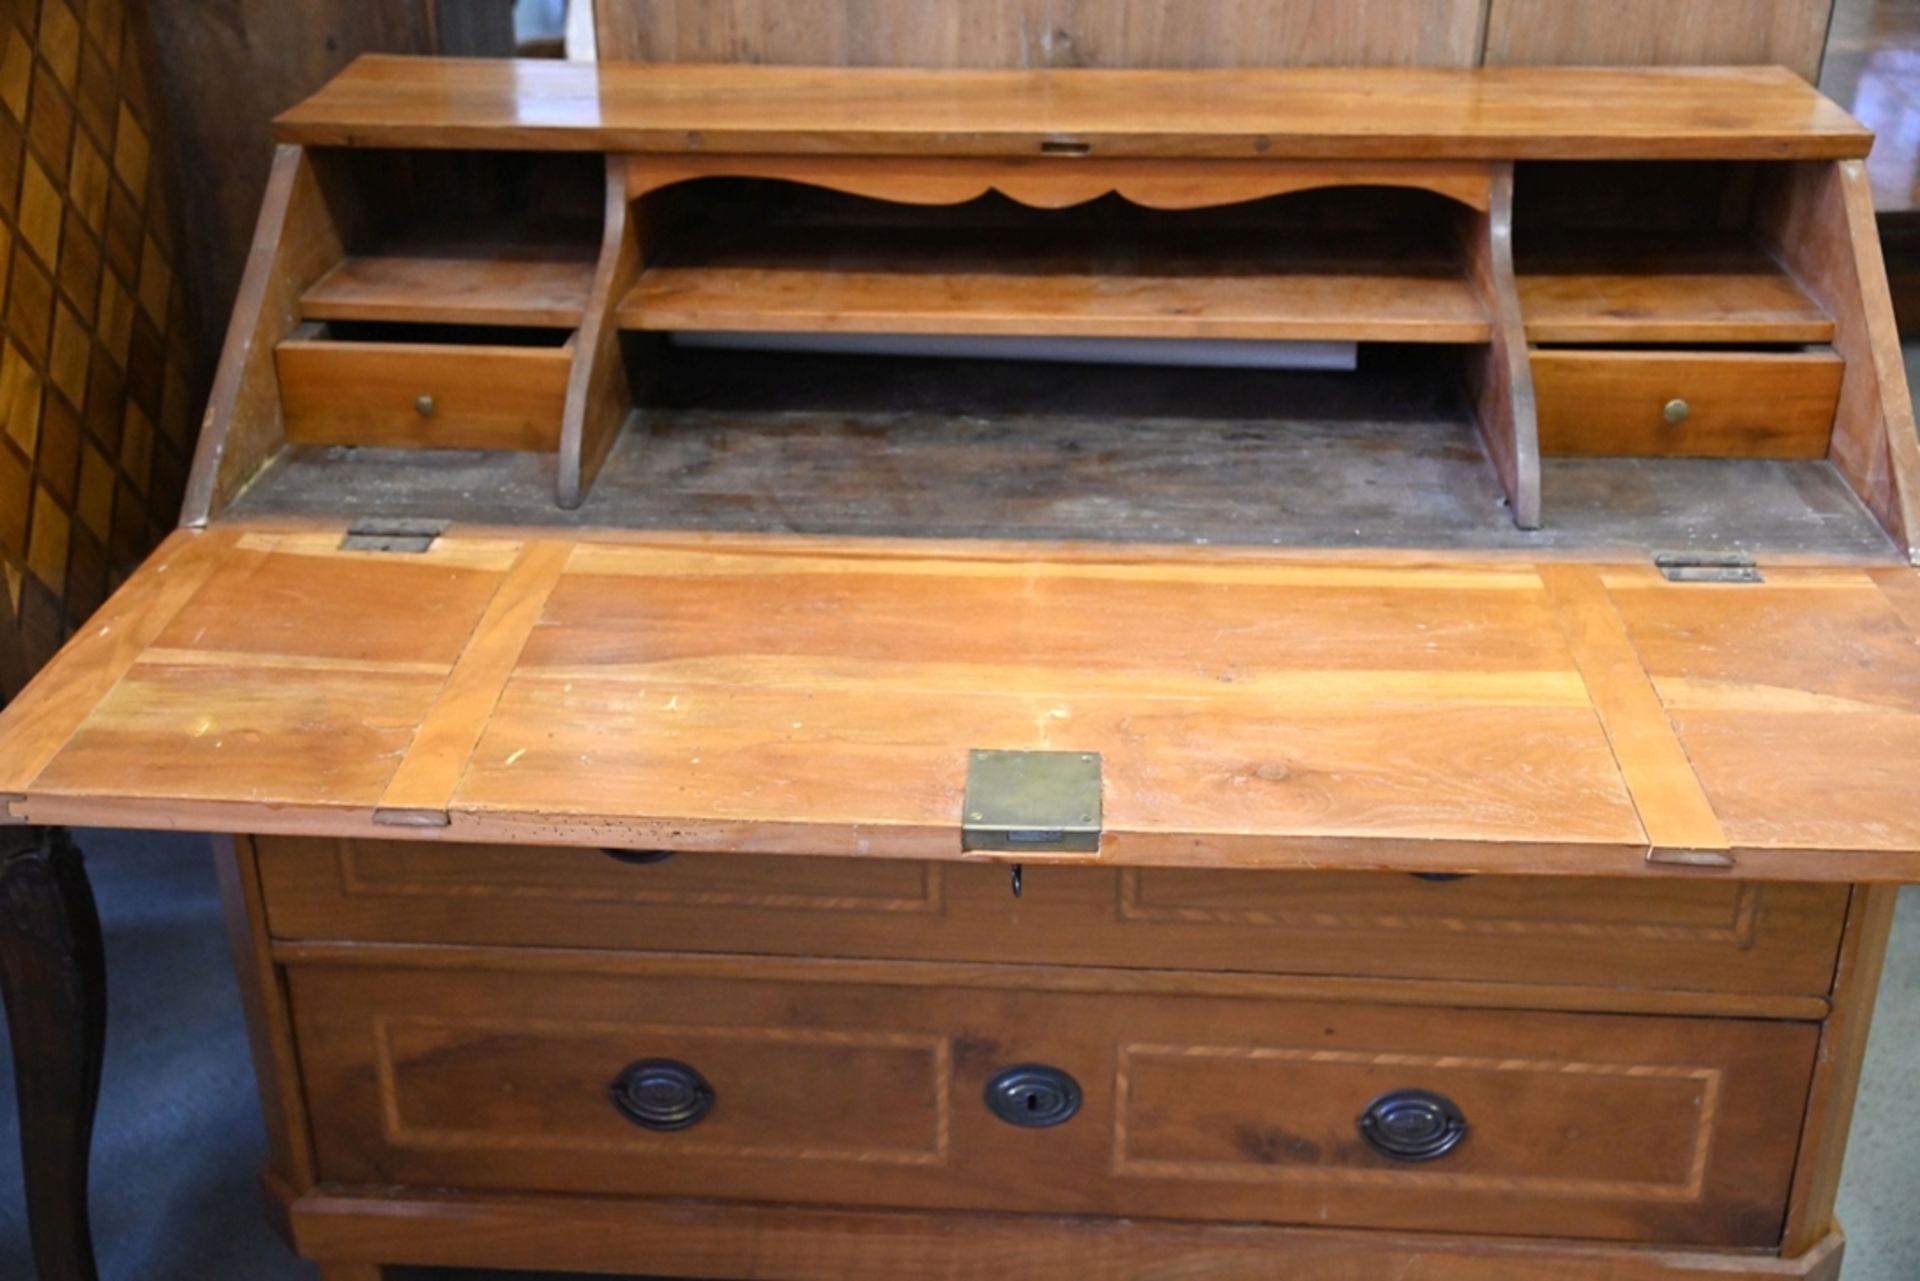 Writing chest with sloping flap, around 1800, cherry wood with thread inlays. Two drawers. Interior - Image 2 of 6